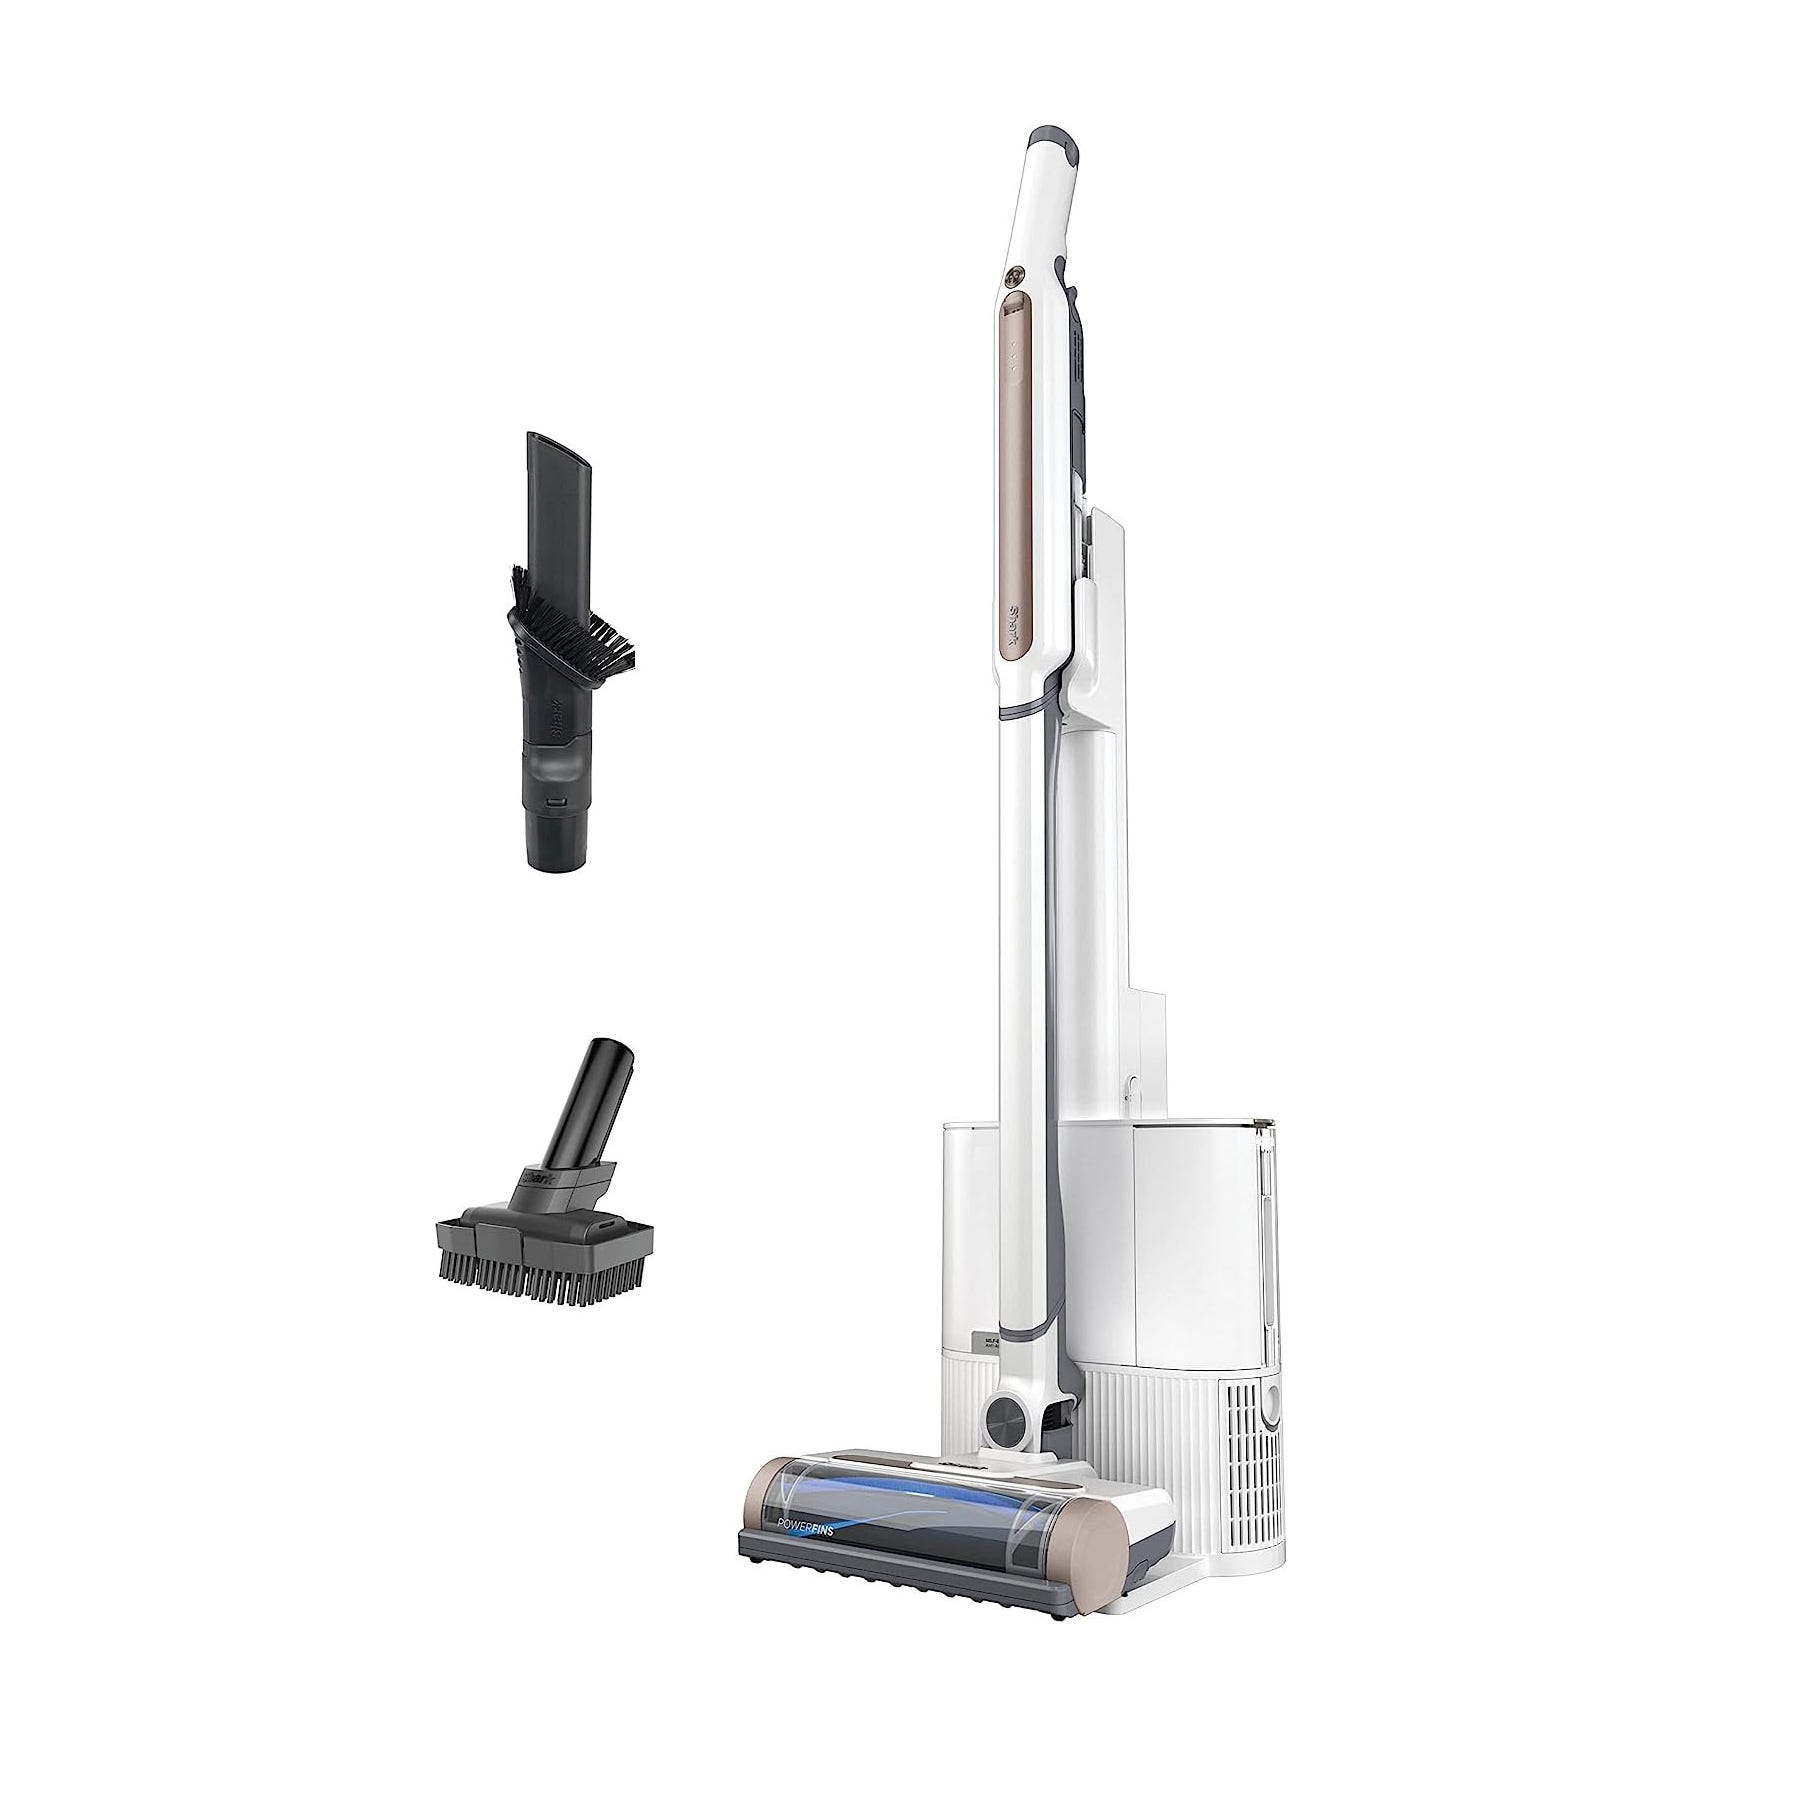 A cordless stick vacuum cleaner with detachable handheld attachments.